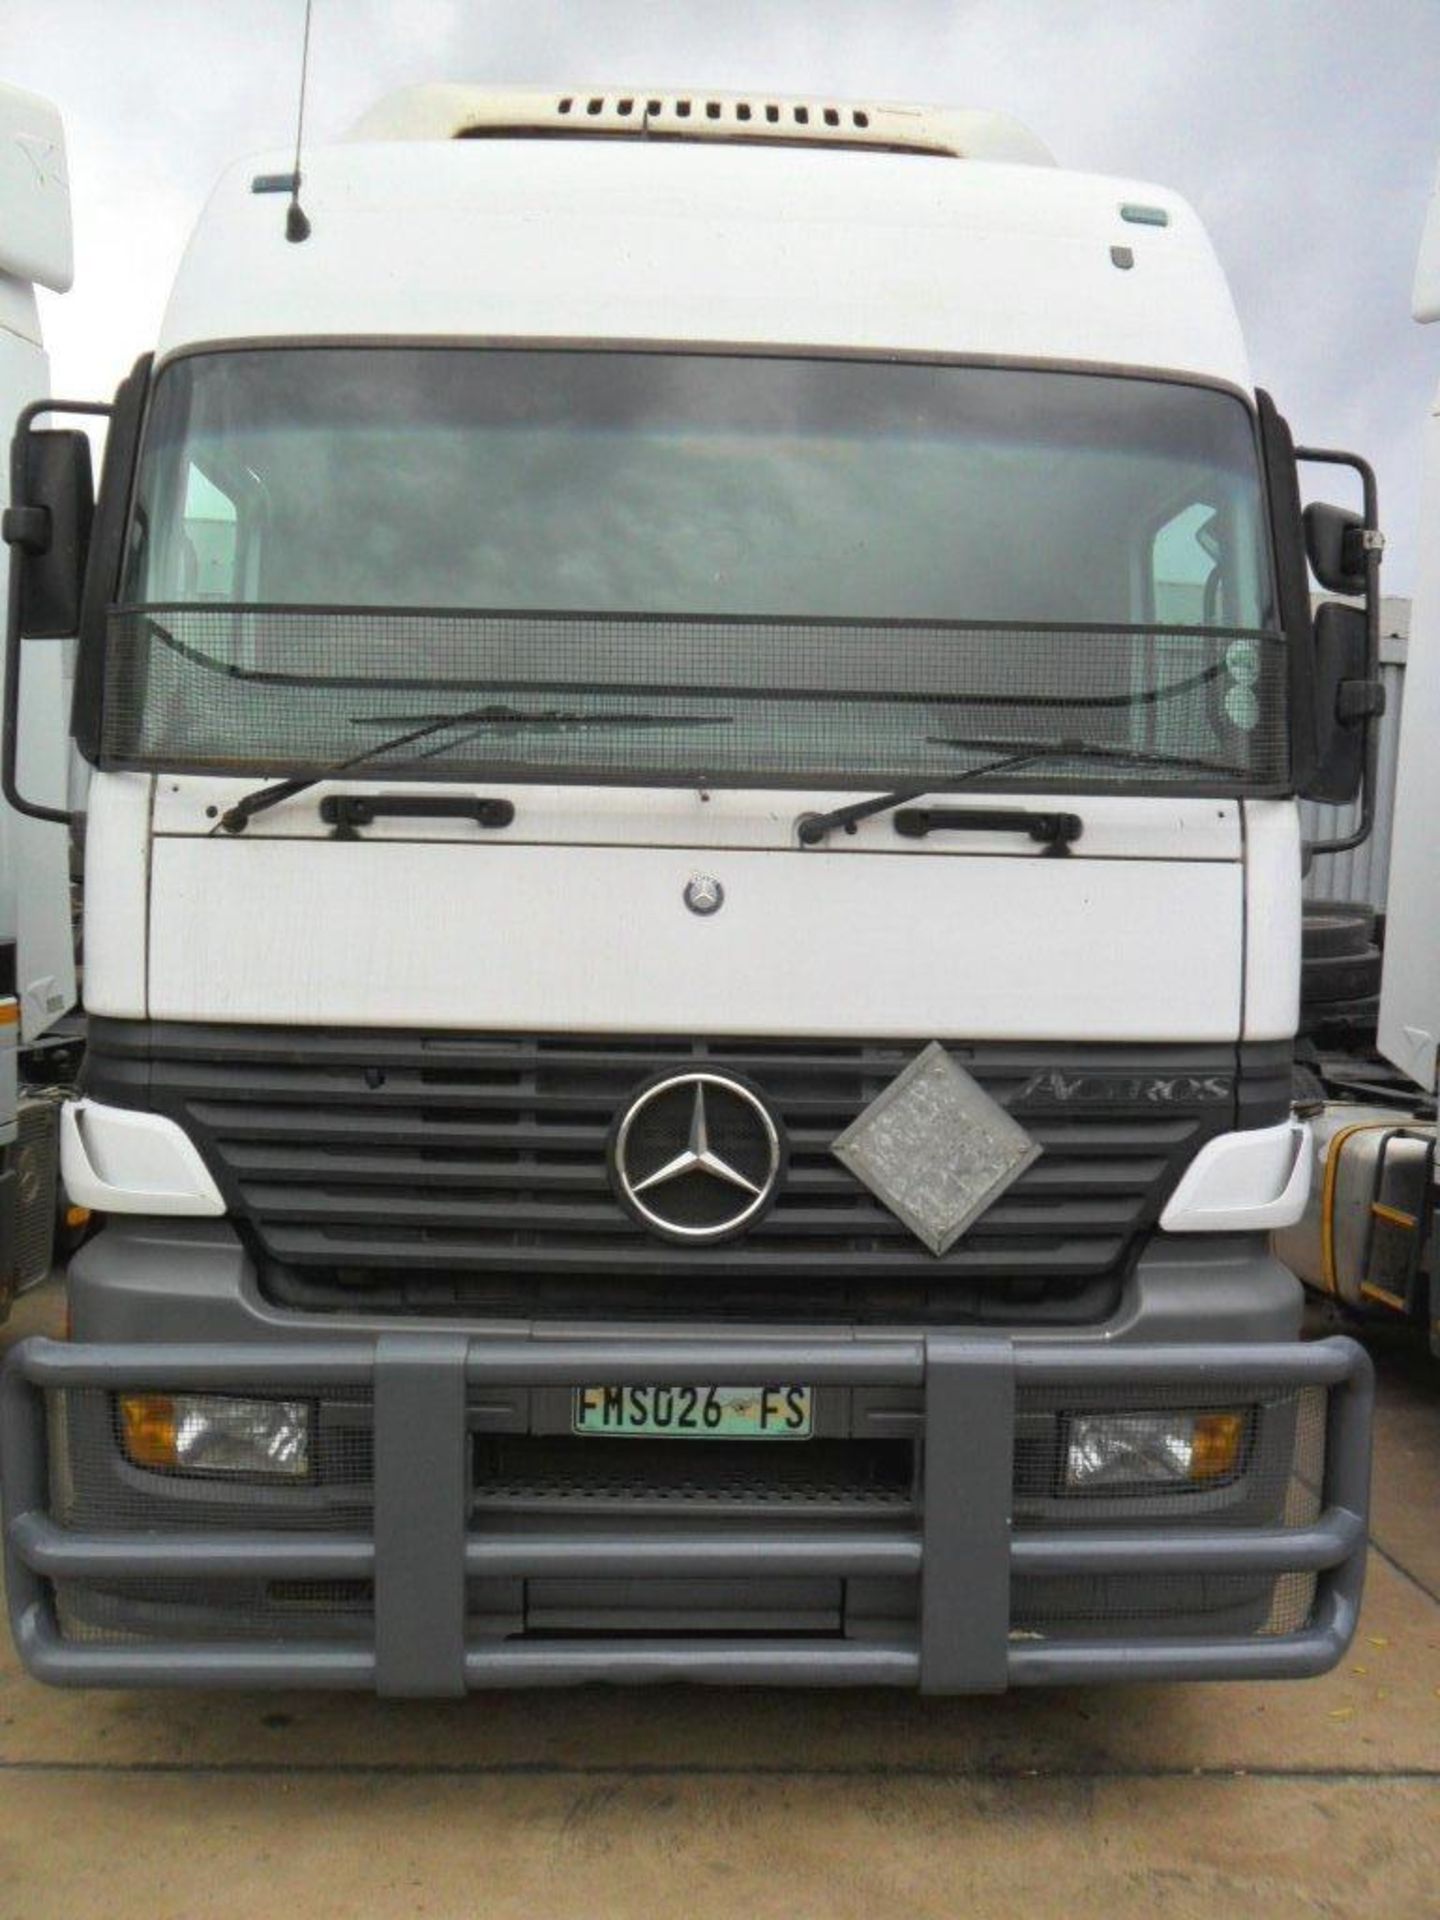 2003 M/BENZ ACTROS 2648 6X4 T/T - REG NO: FMS026FS - (ITEM TO BE SOLD SUBJECT TO CONFIRMATION) - Image 7 of 10